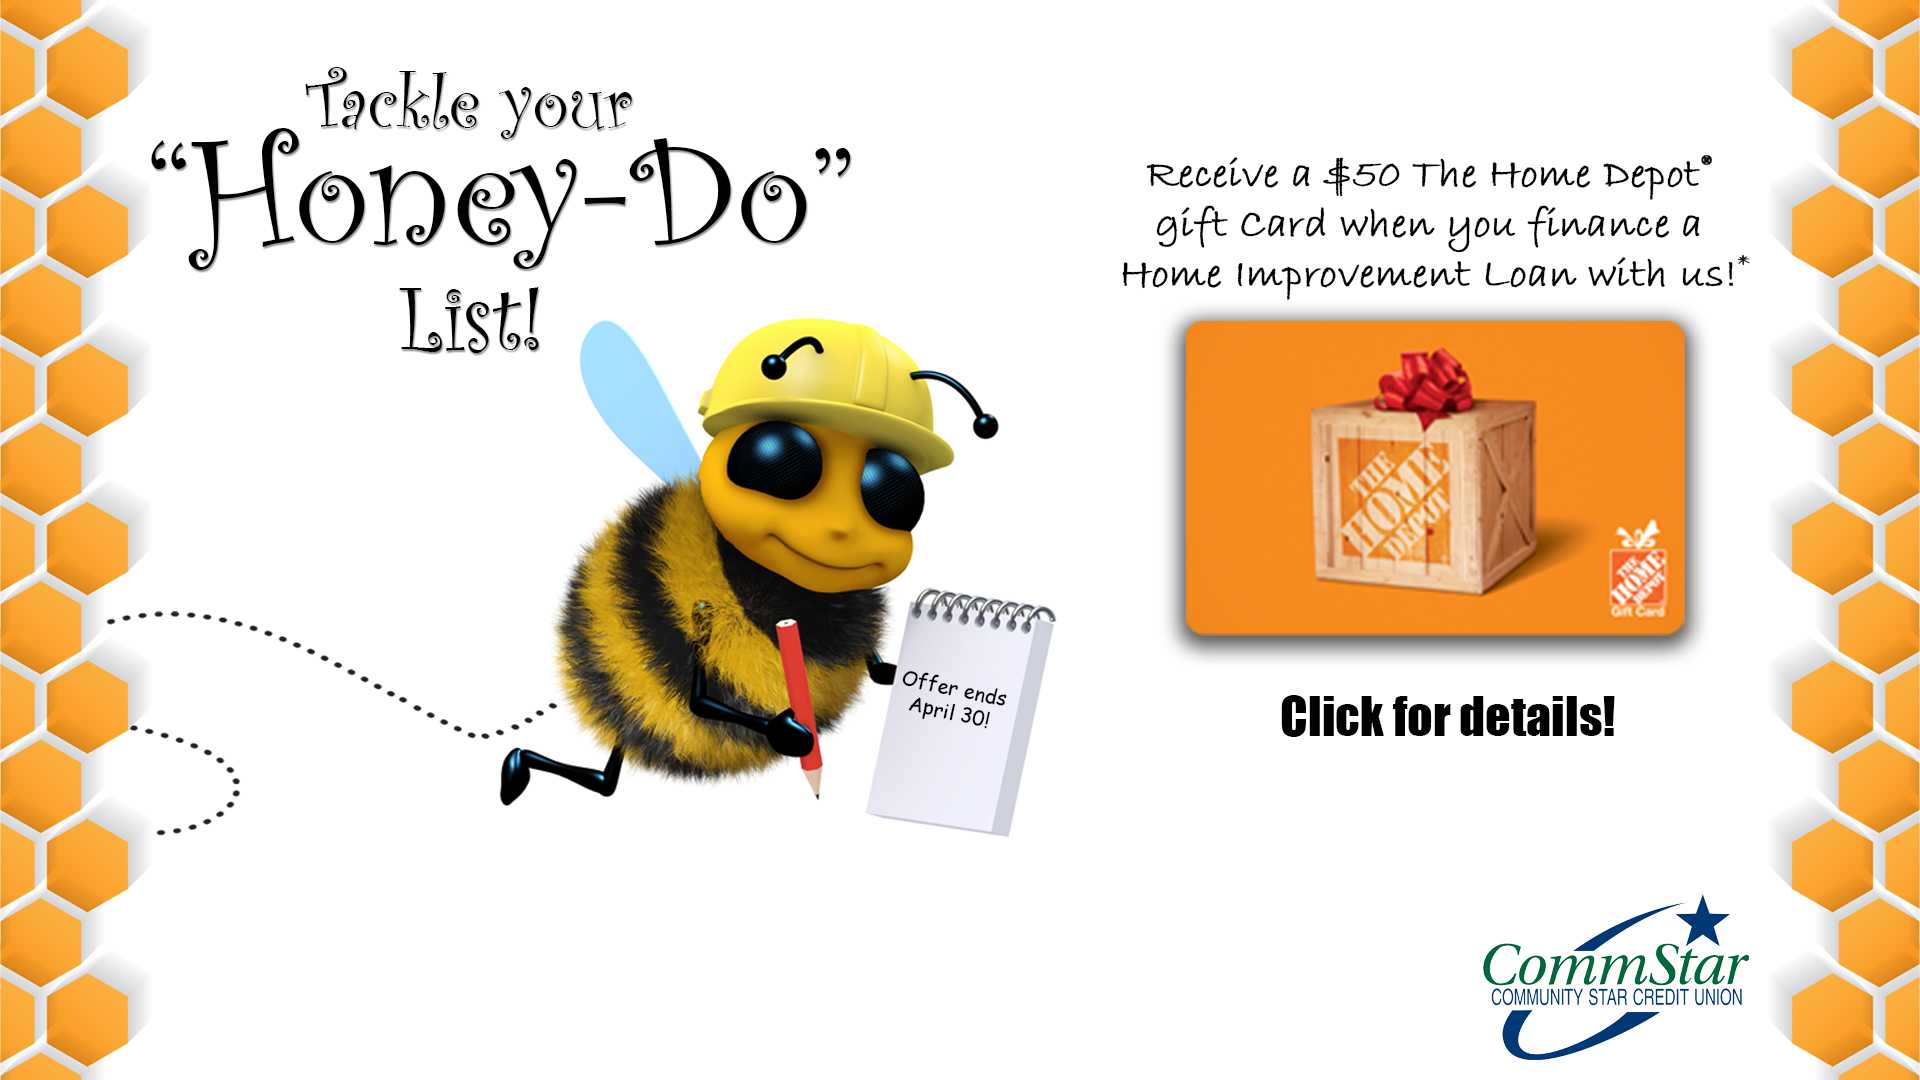 Image: A honey bee in a hard hat with a notepad. A large representation of a gift card to The Home Depot. Text: "Tackle your 'honey do' list! Receive a $50 The Home Depot gift card when you finance a Home Improvement Loan with us! Click for details. CommStar Credit Union logo.